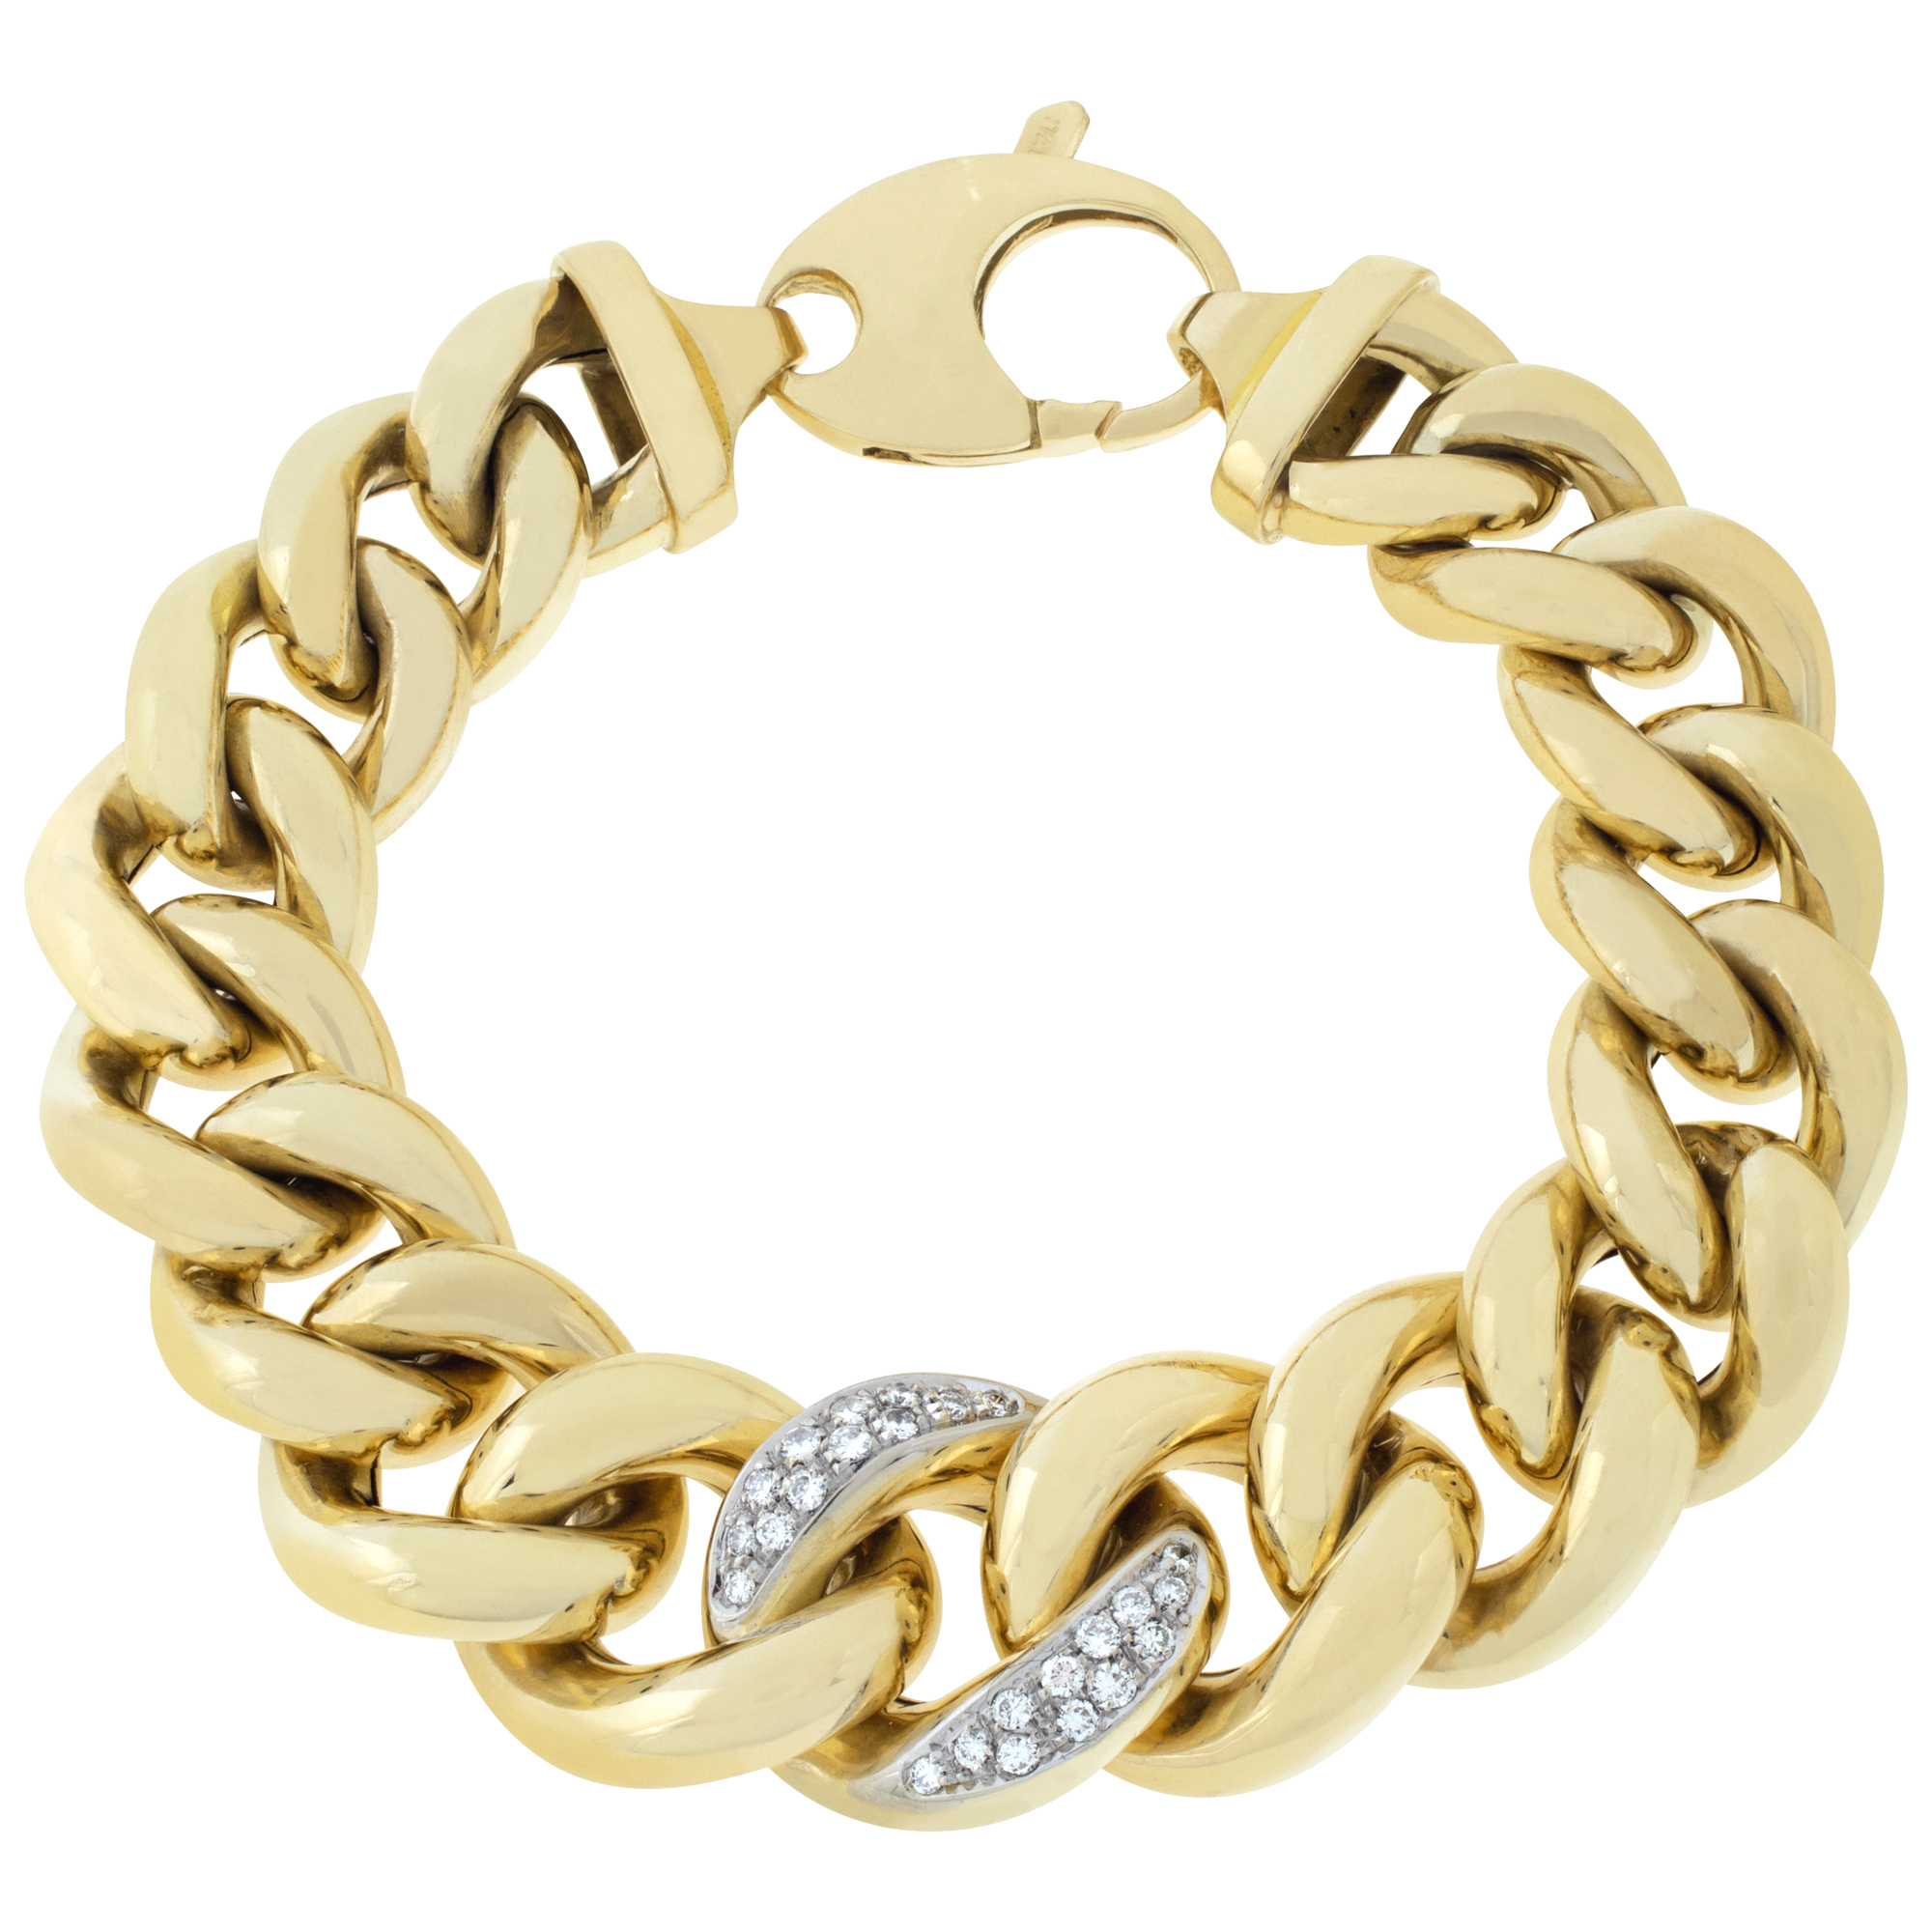 Light Weight 18k chain bracelet with pave diamond accents